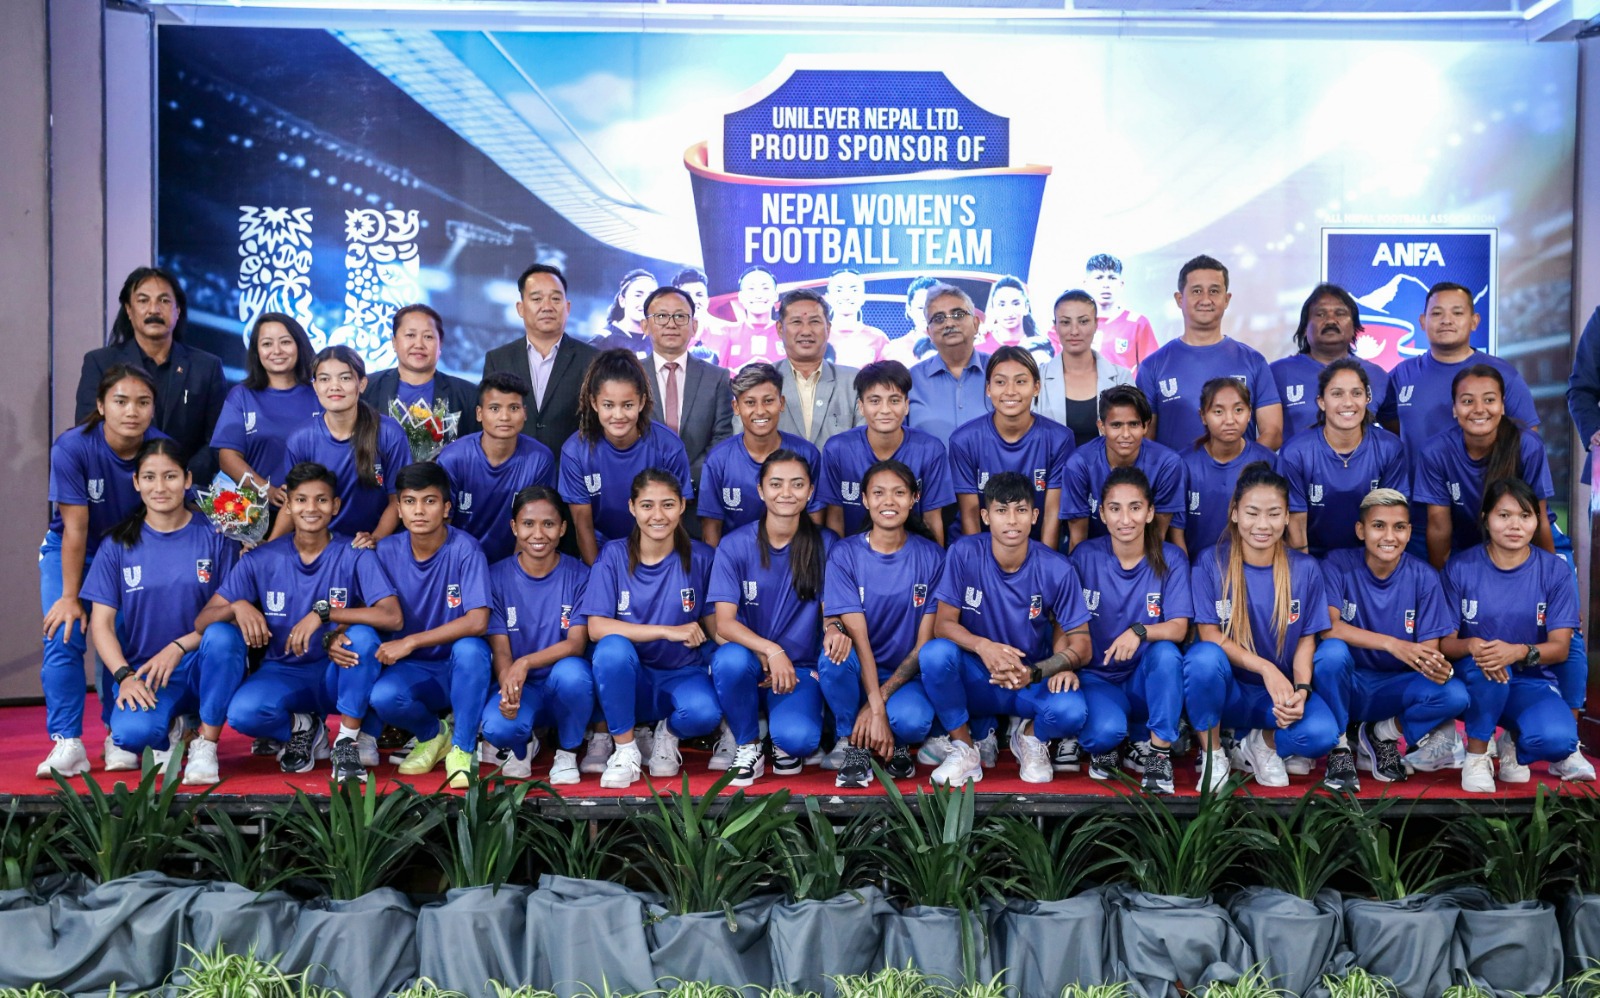 Unilever Nepal joins hands with ANFA to support the Nepal women's football team